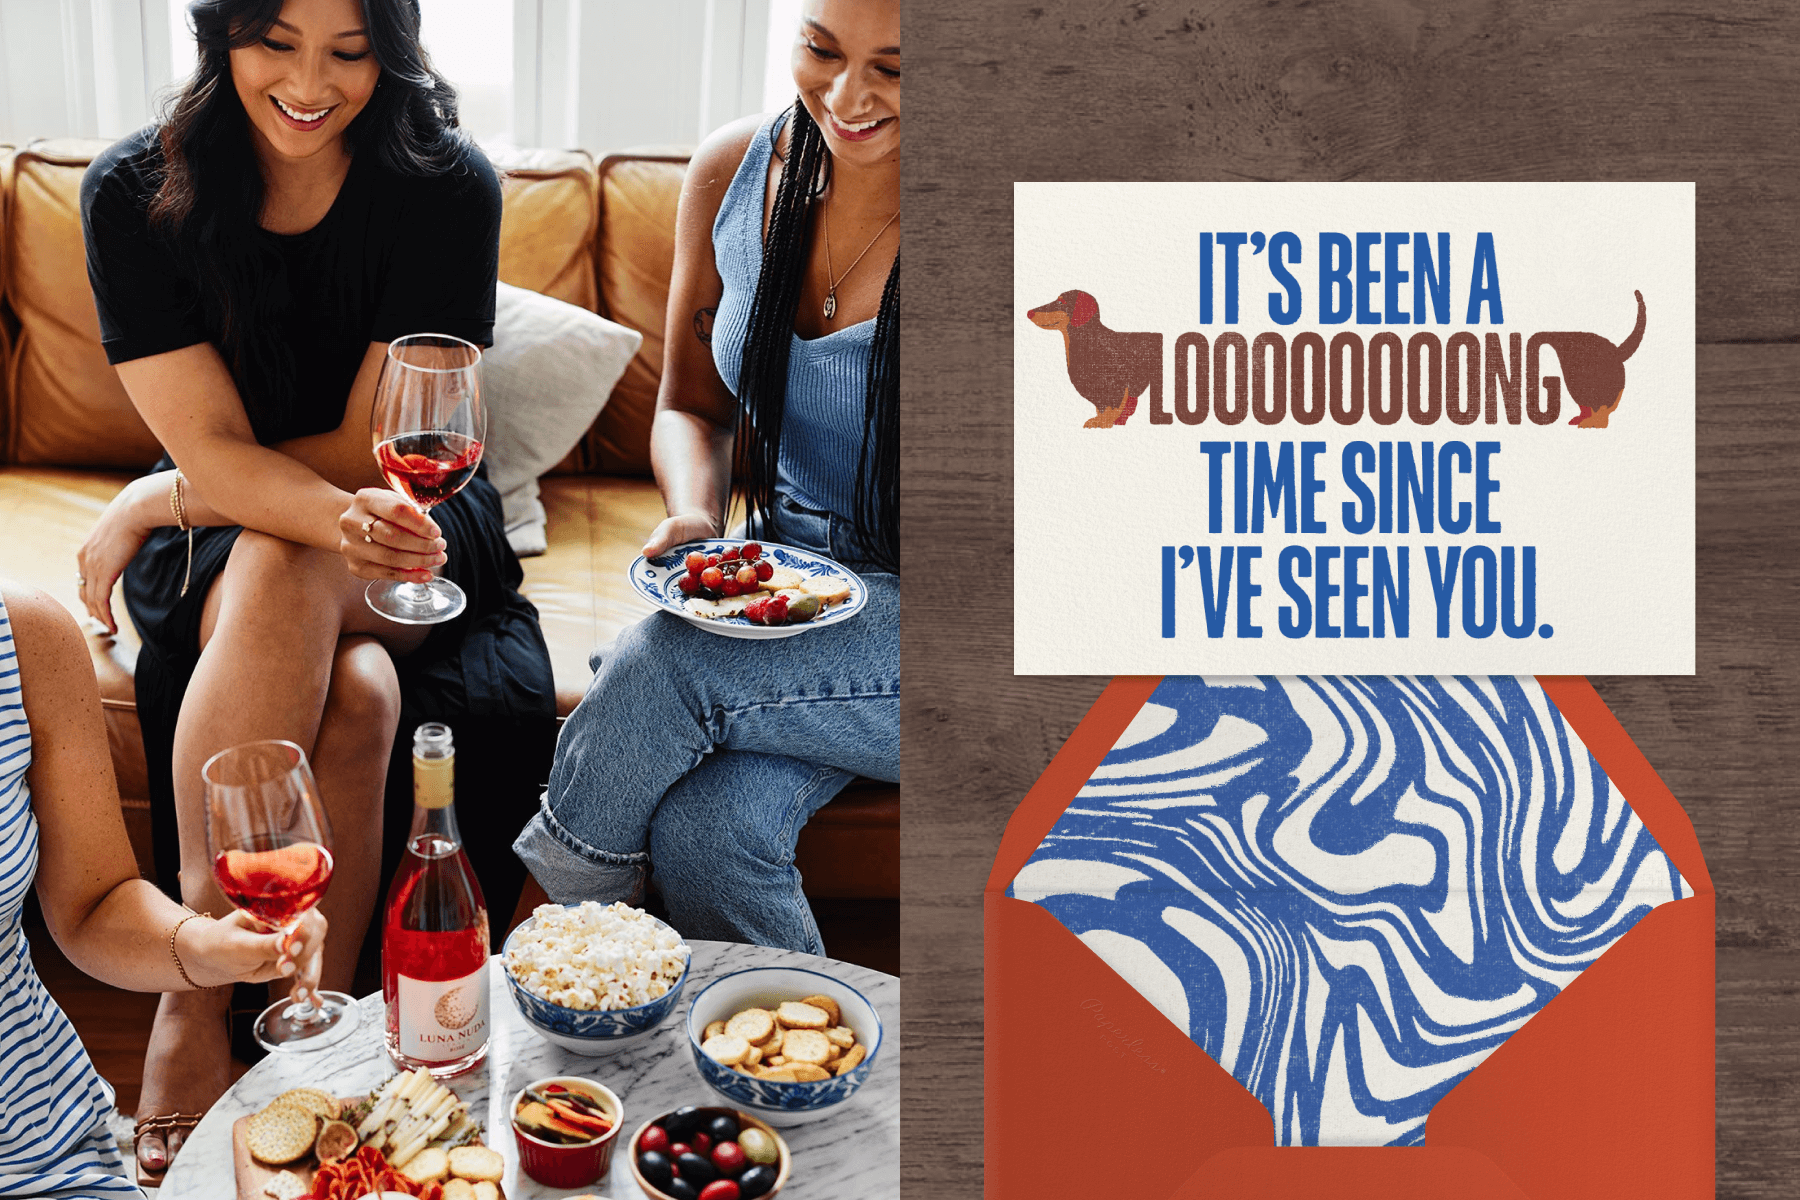 Left: Several women drinking wine gathered around a coffee table with other drinks and snacks. Right: Party invitation that reads, "It's been a long time since I've seen you," and features a dachshund illustration, with a red envelope featuring a blue and white liner. 